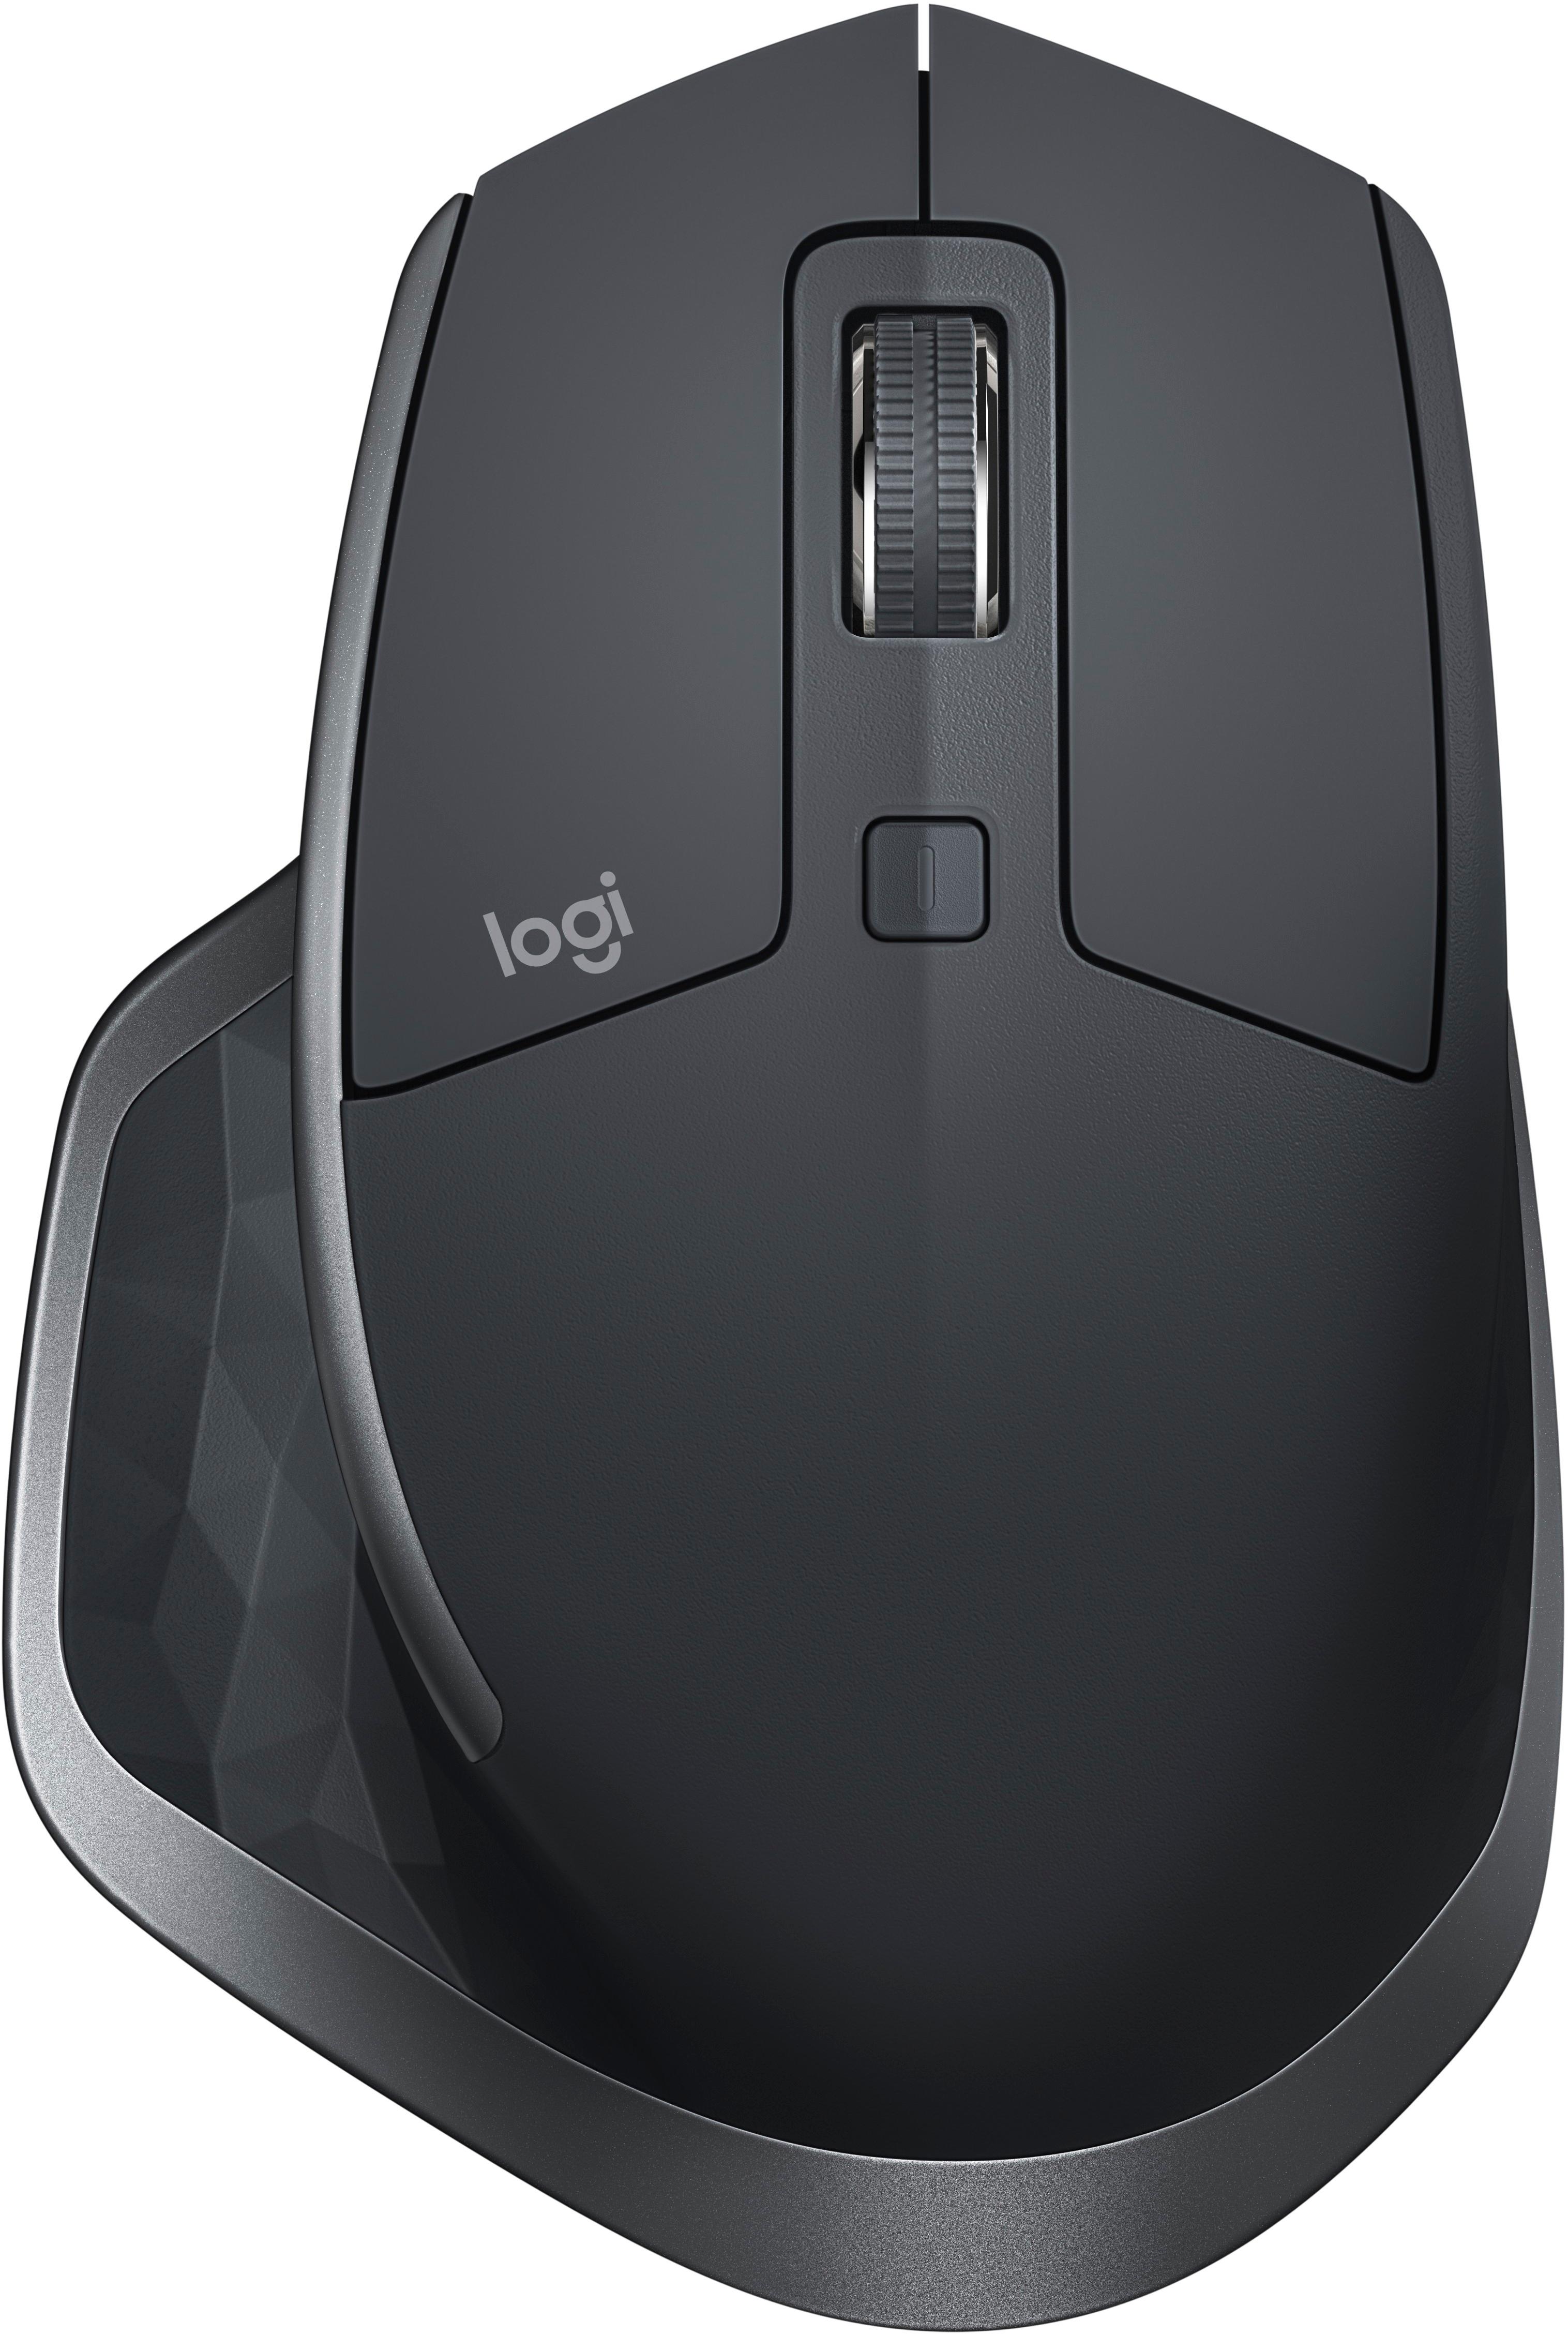 Grab Logitech's MX Master 2S wireless mouse for blissful gaming